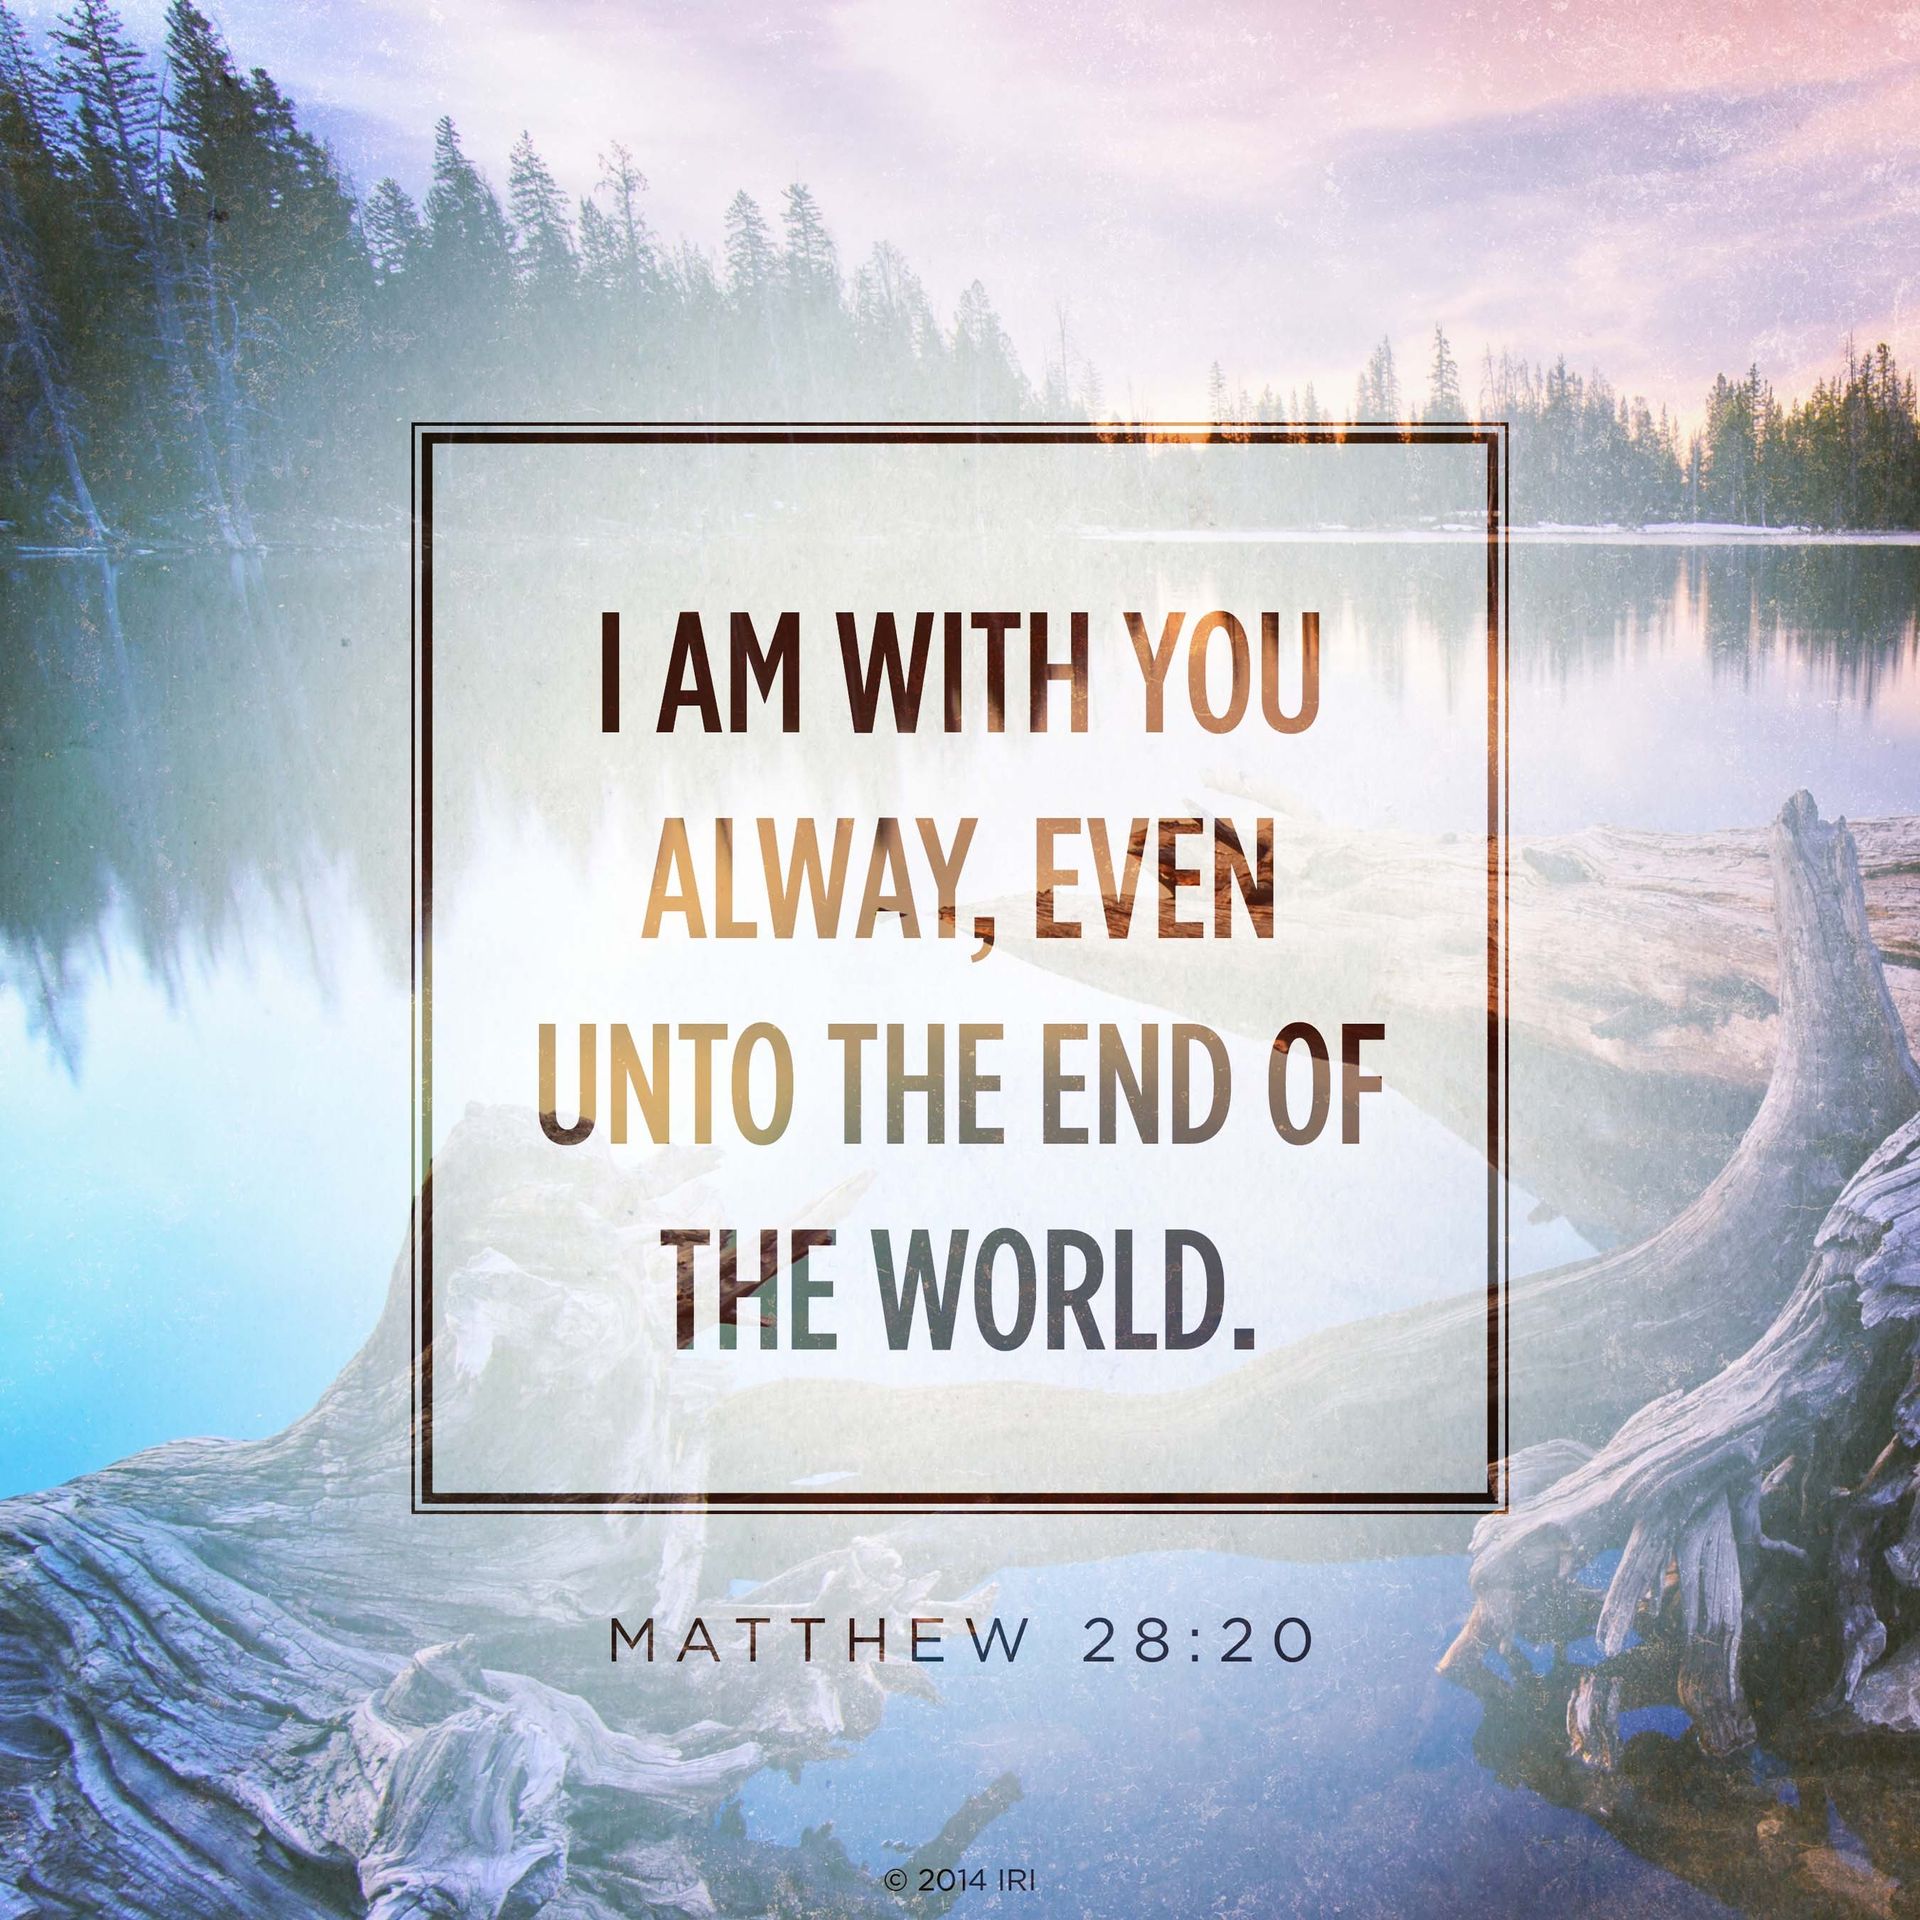 “I am with you alway, even unto the end of the world.”—Matthew 28:20